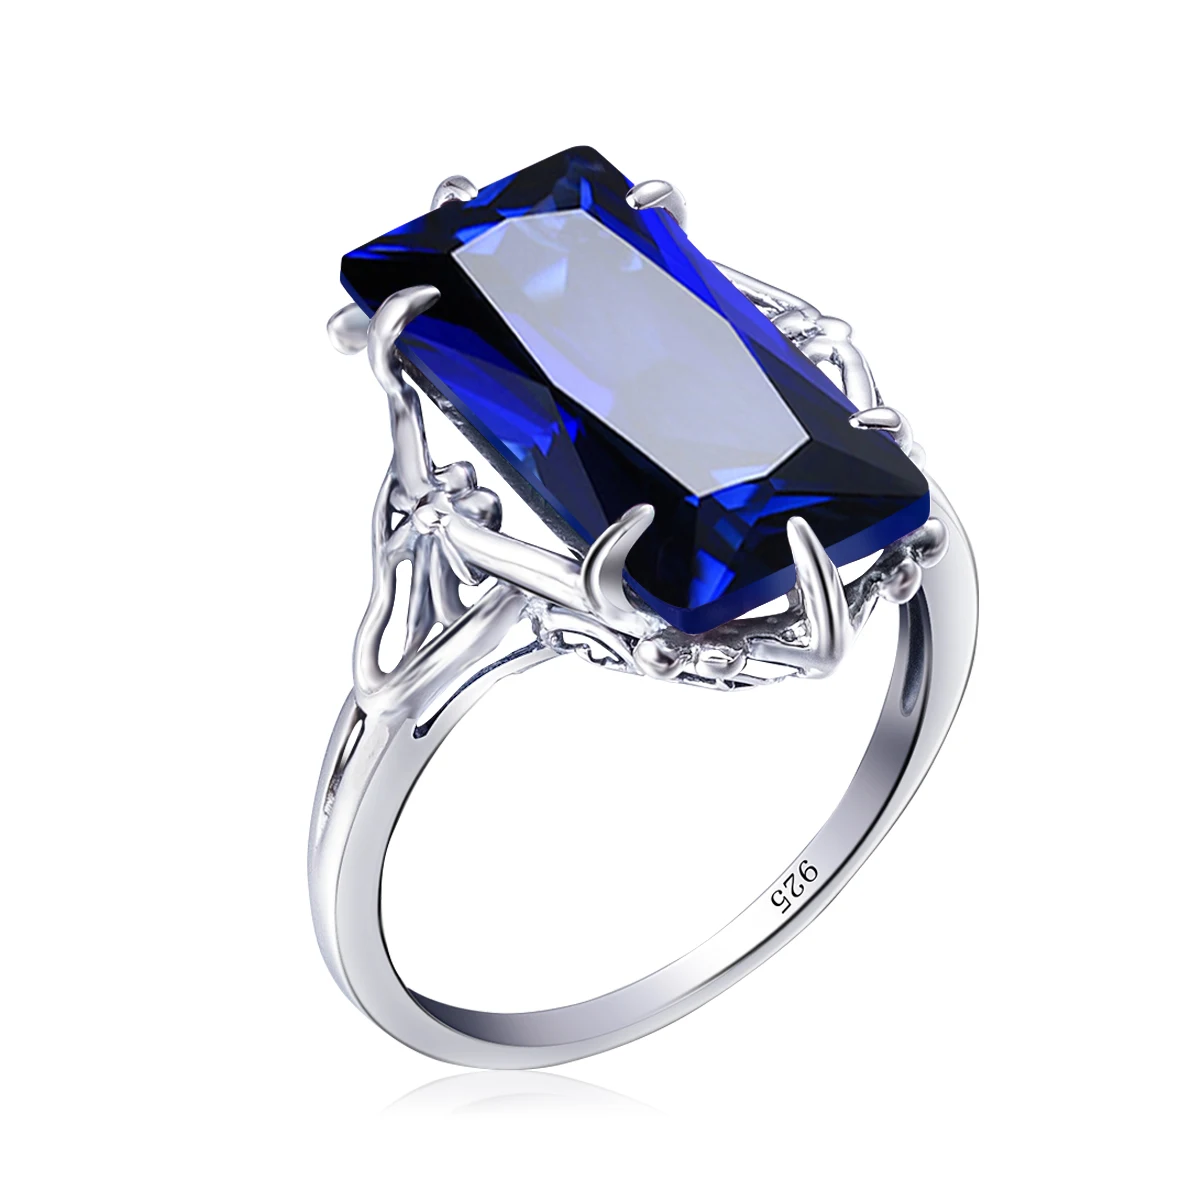 #448 BLUE LAB SAPPHIRE ANTIQUE DECO STYLE .925 STERLING SILVER RING SIZE 6.75 